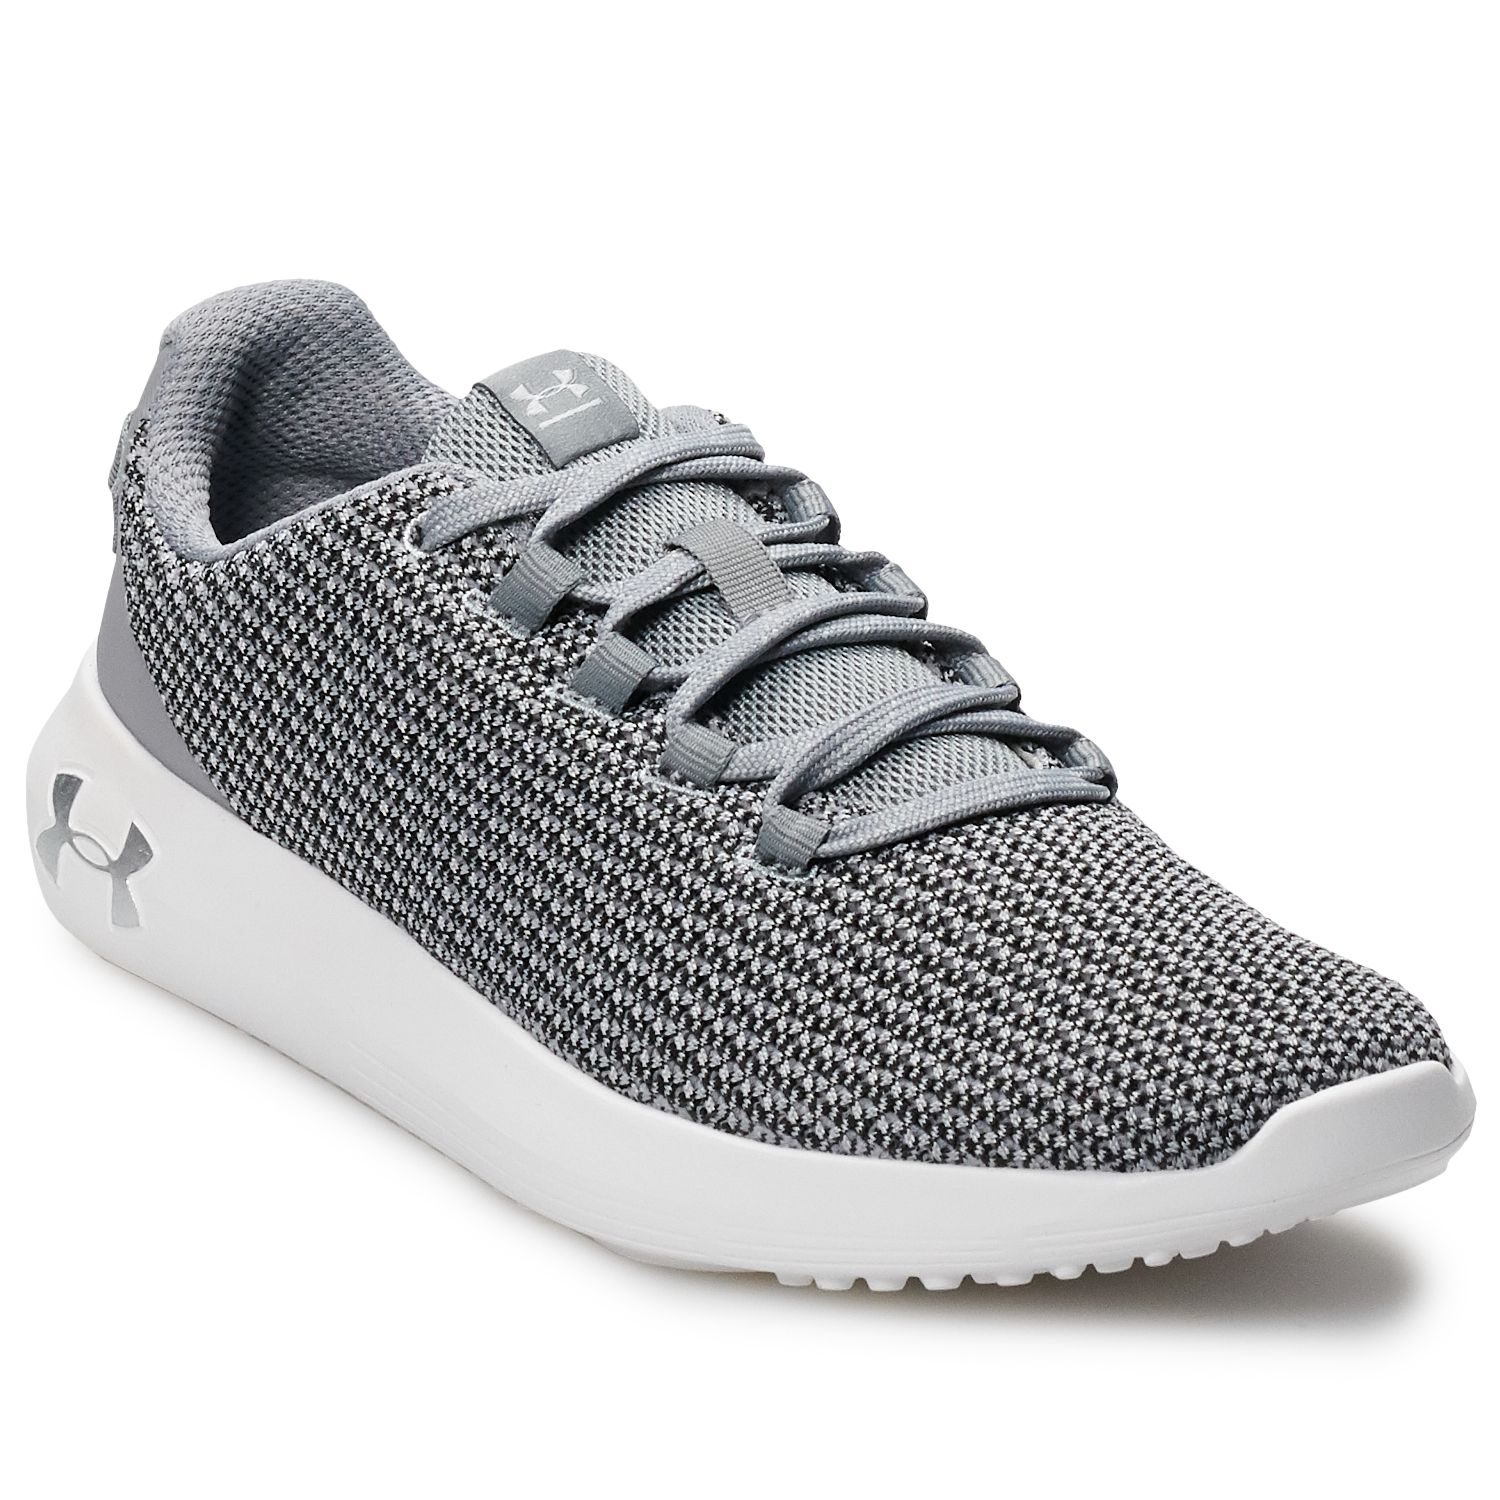 under armour women's ripple shoes